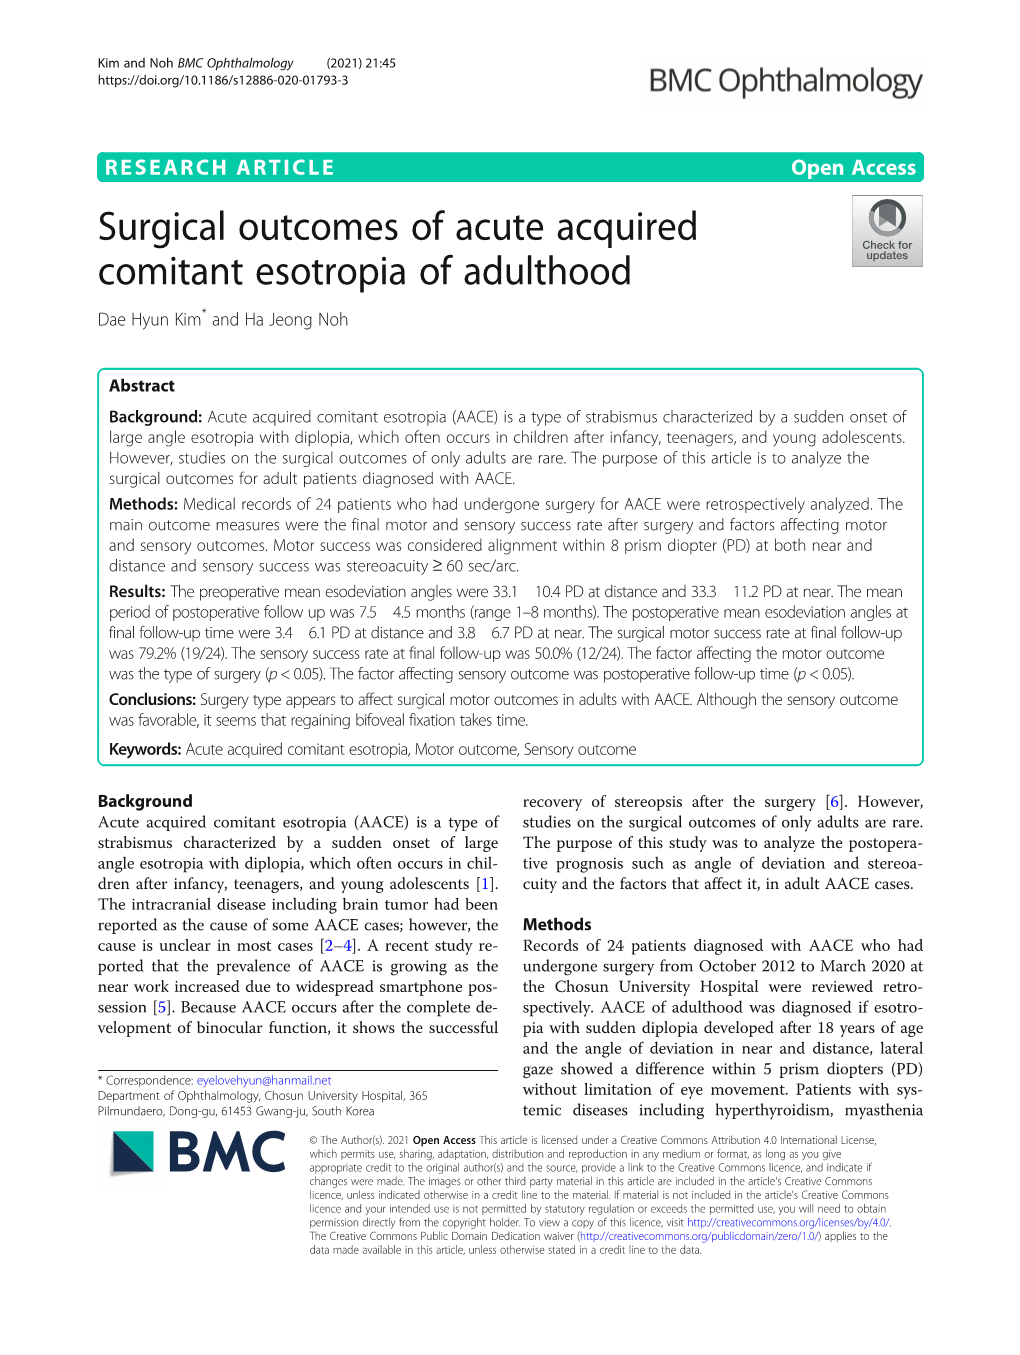 Surgical Outcomes of Acute Acquired Comitant Esotropia of Adulthood Dae Hyun Kim* and Ha Jeong Noh